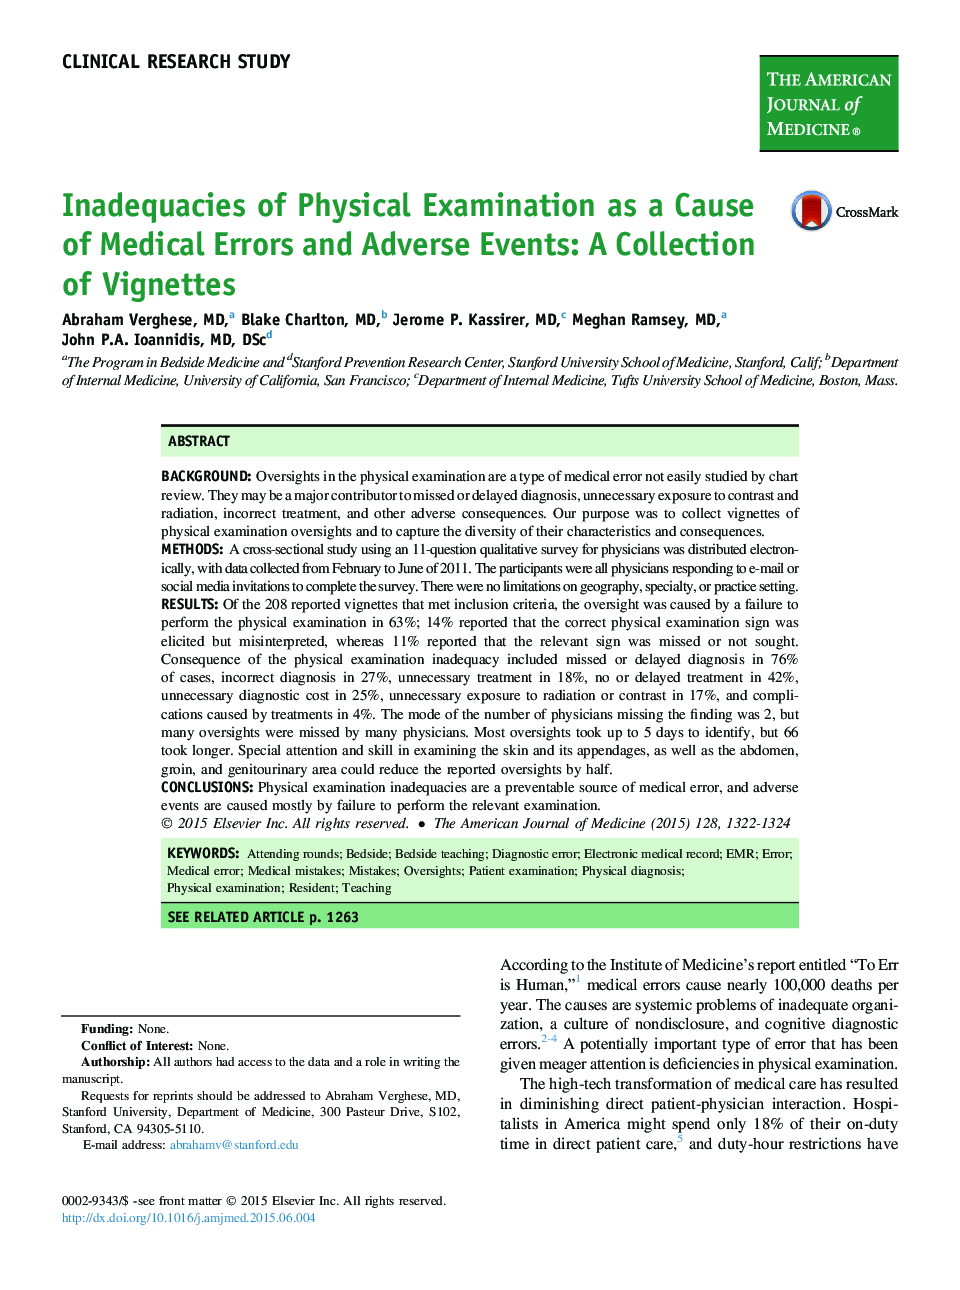 Inadequacies of Physical Examination as a Cause of Medical Errors and Adverse Events: A Collection of Vignettes